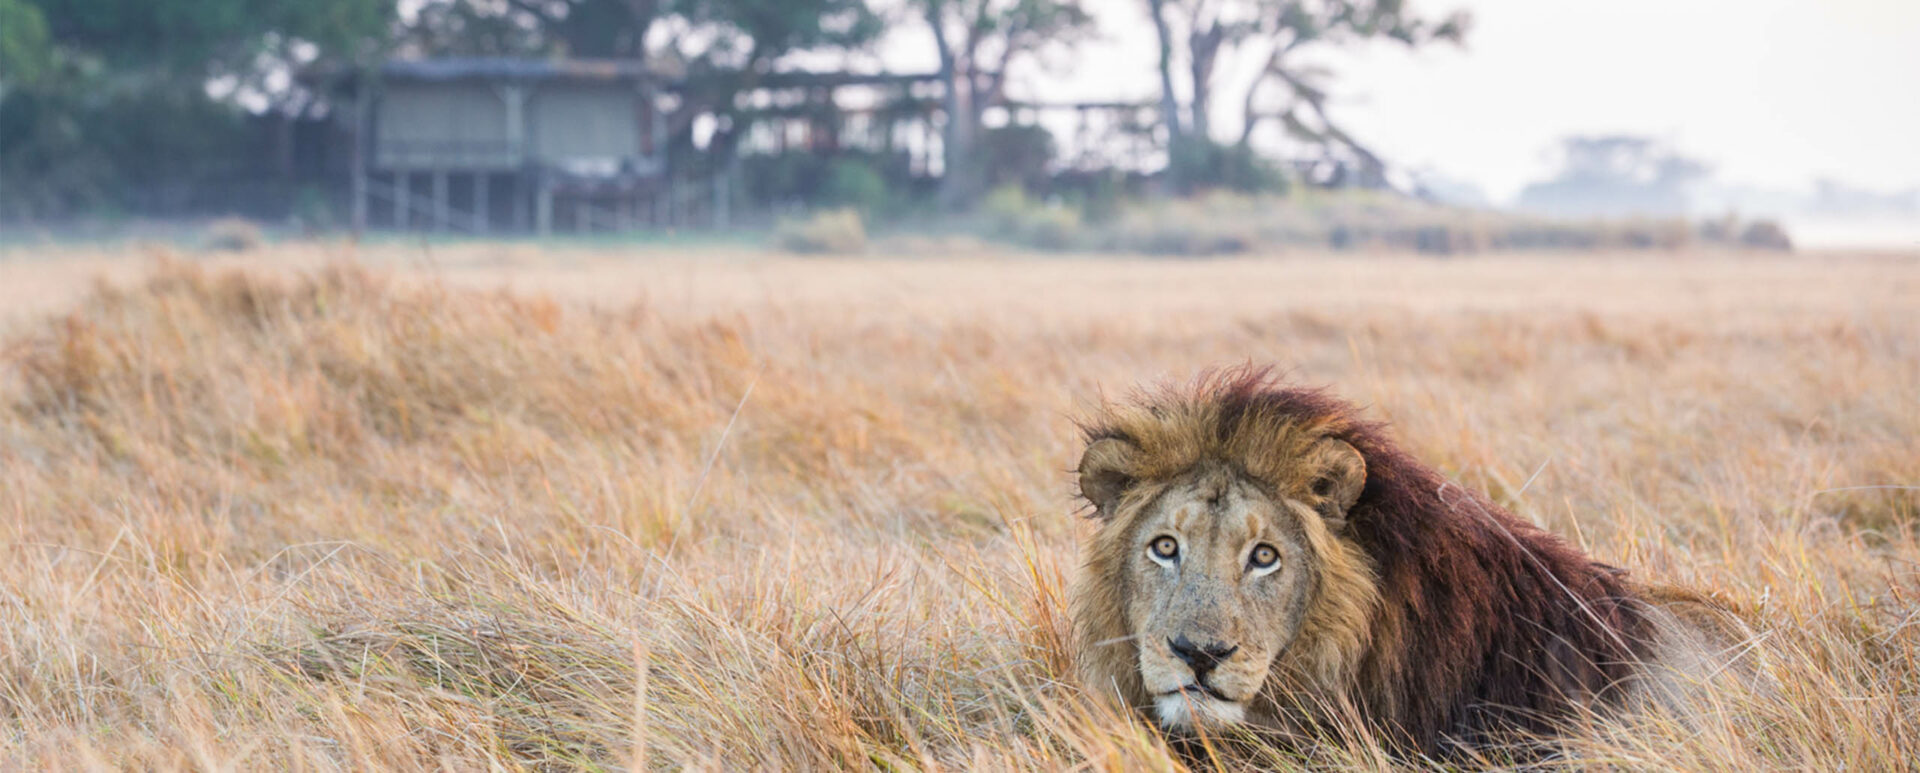 Lodges in Kafue National Park, Zambia. Here view of a lion.